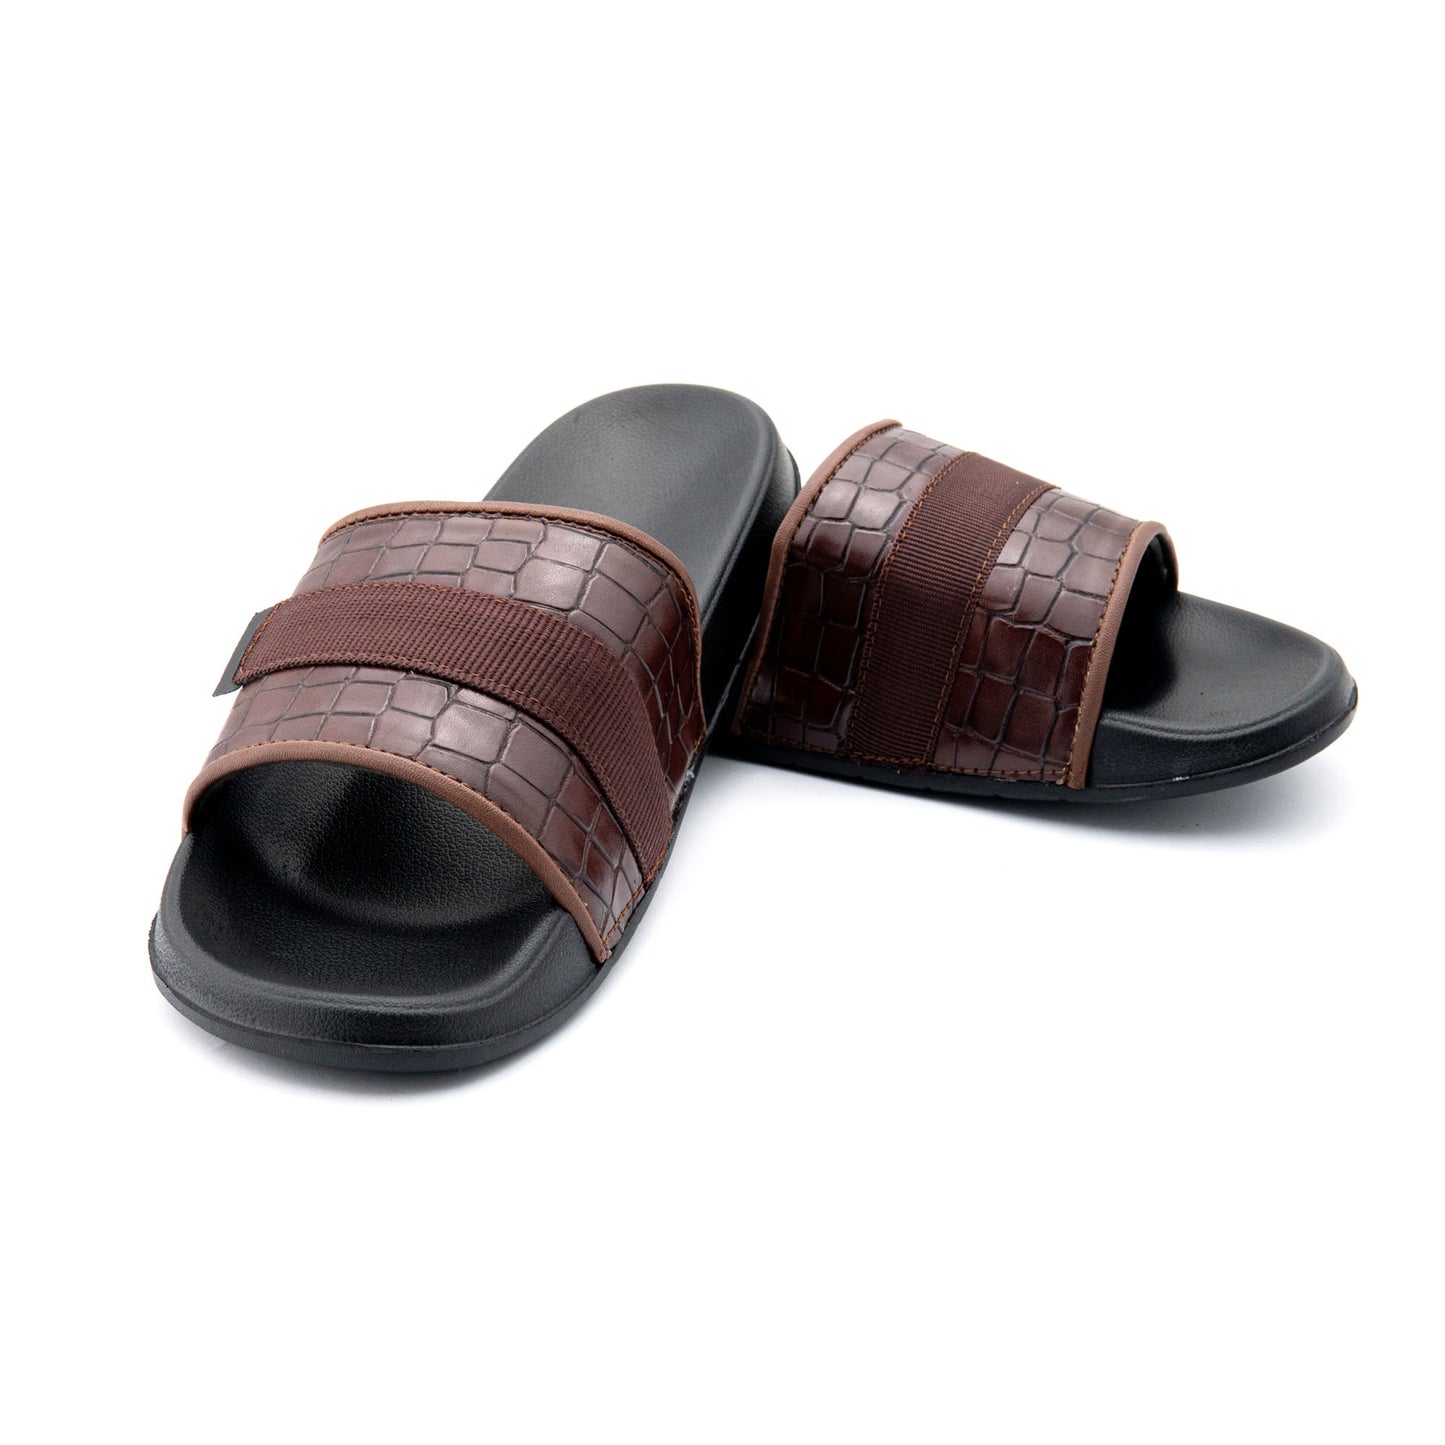 Coffee Strap Styled Comfy Slides